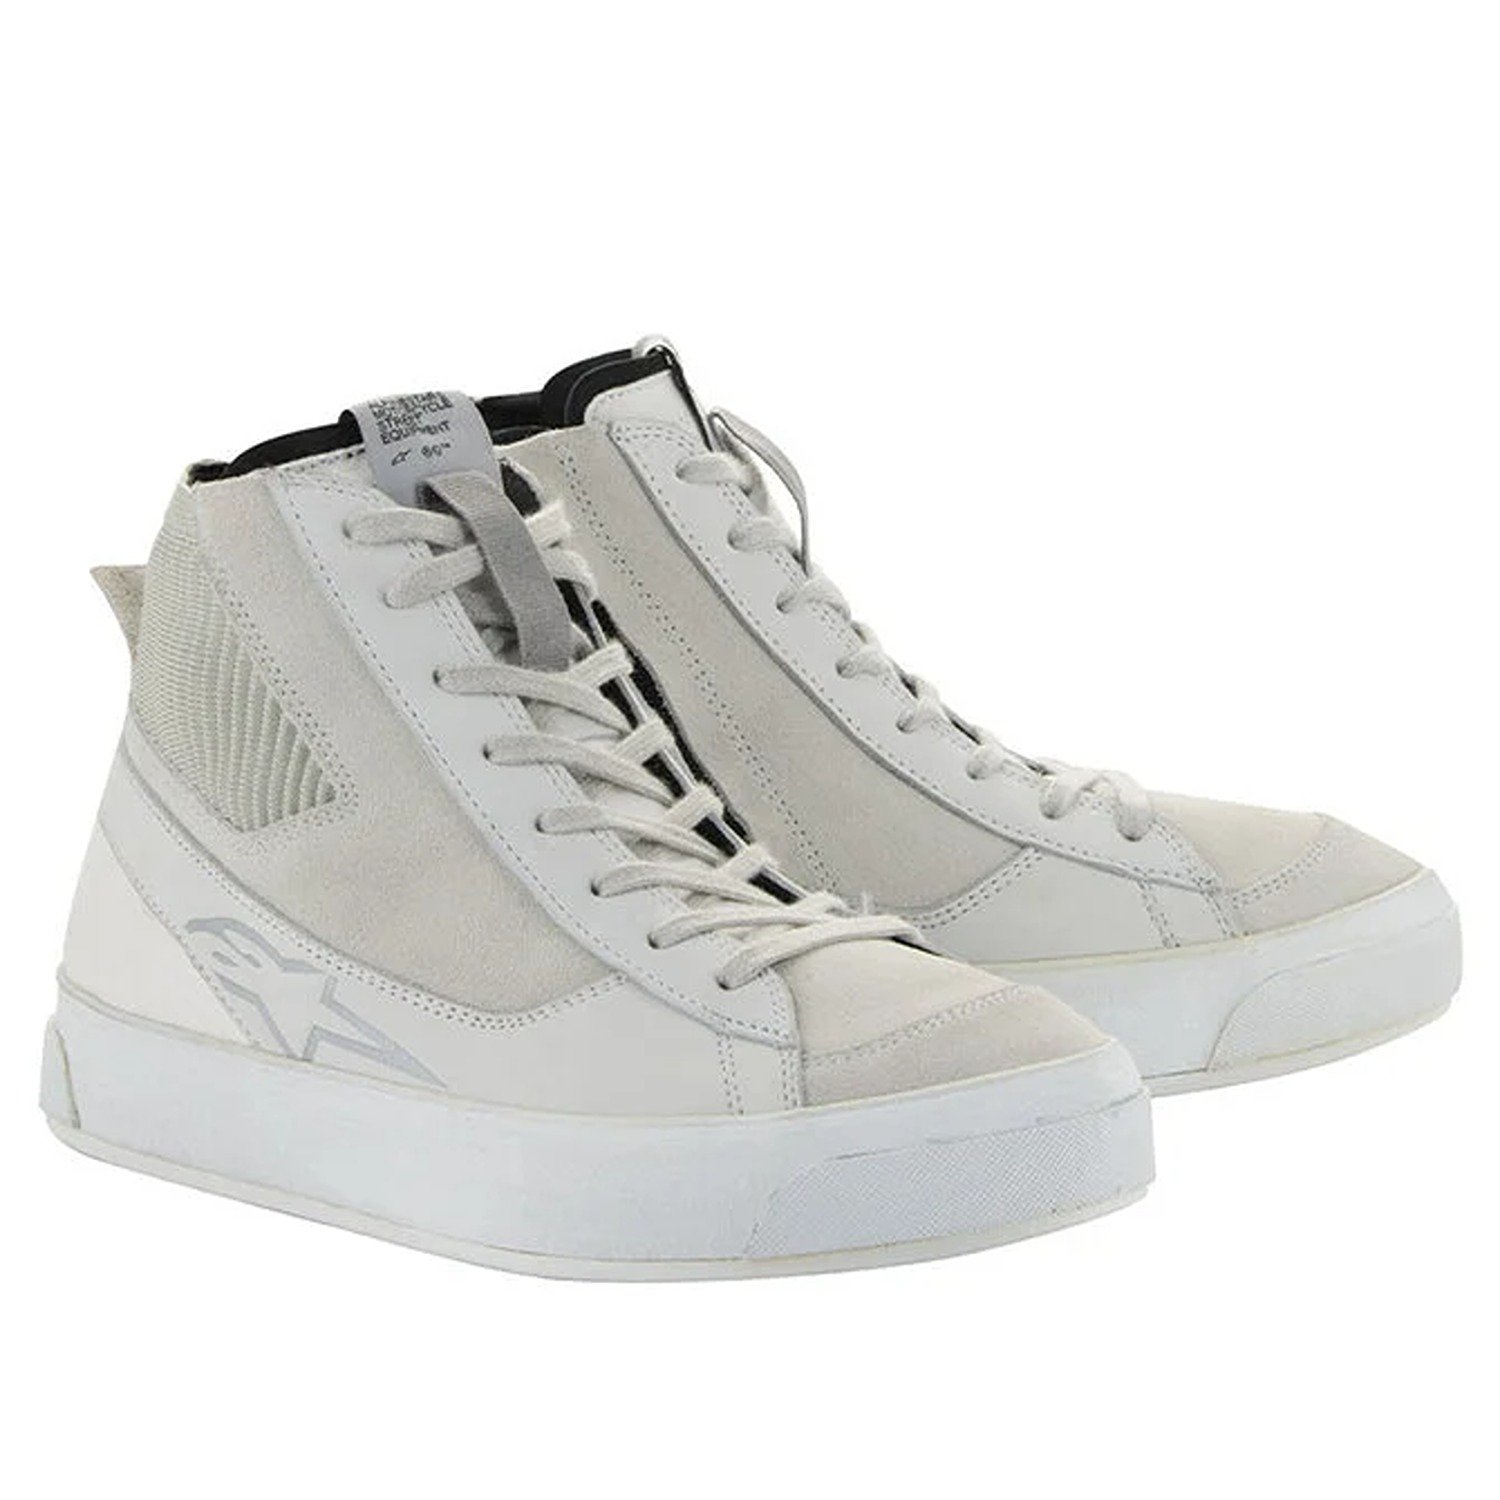 Image of Alpinestars Stated Shoes White Cool Gray Talla US 12